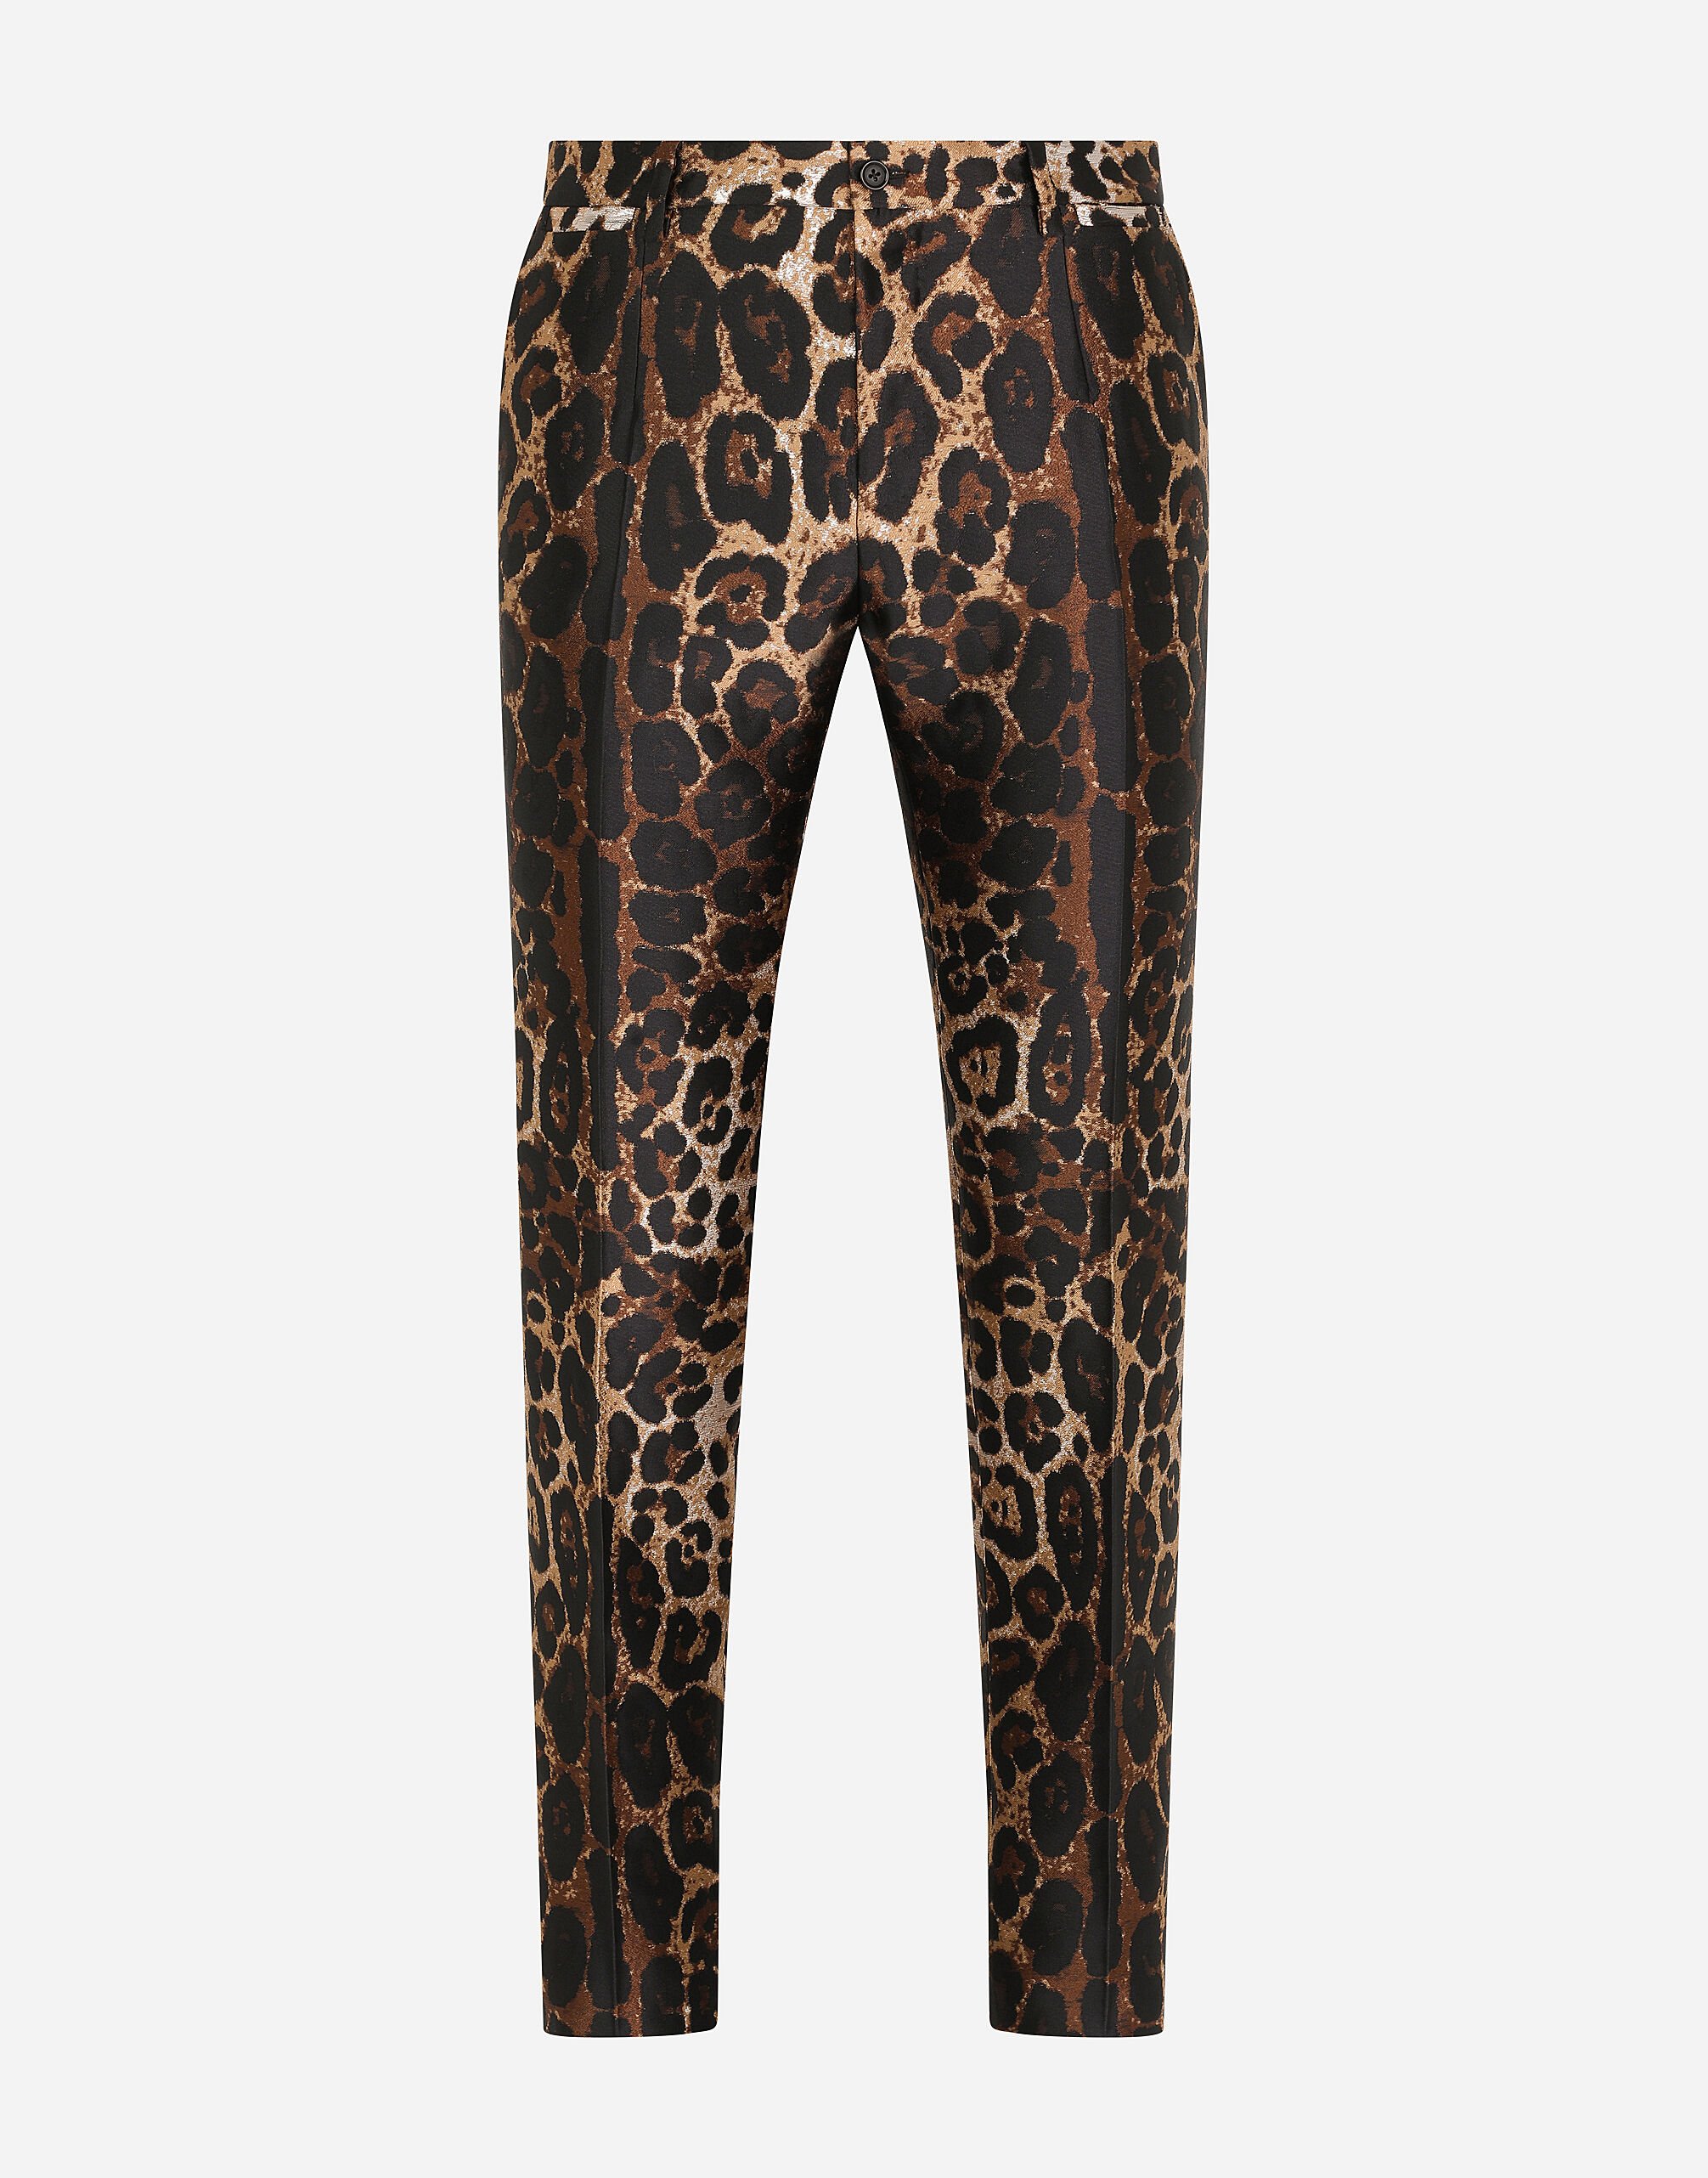 Jacquard pants with leopard design in Animal Print for